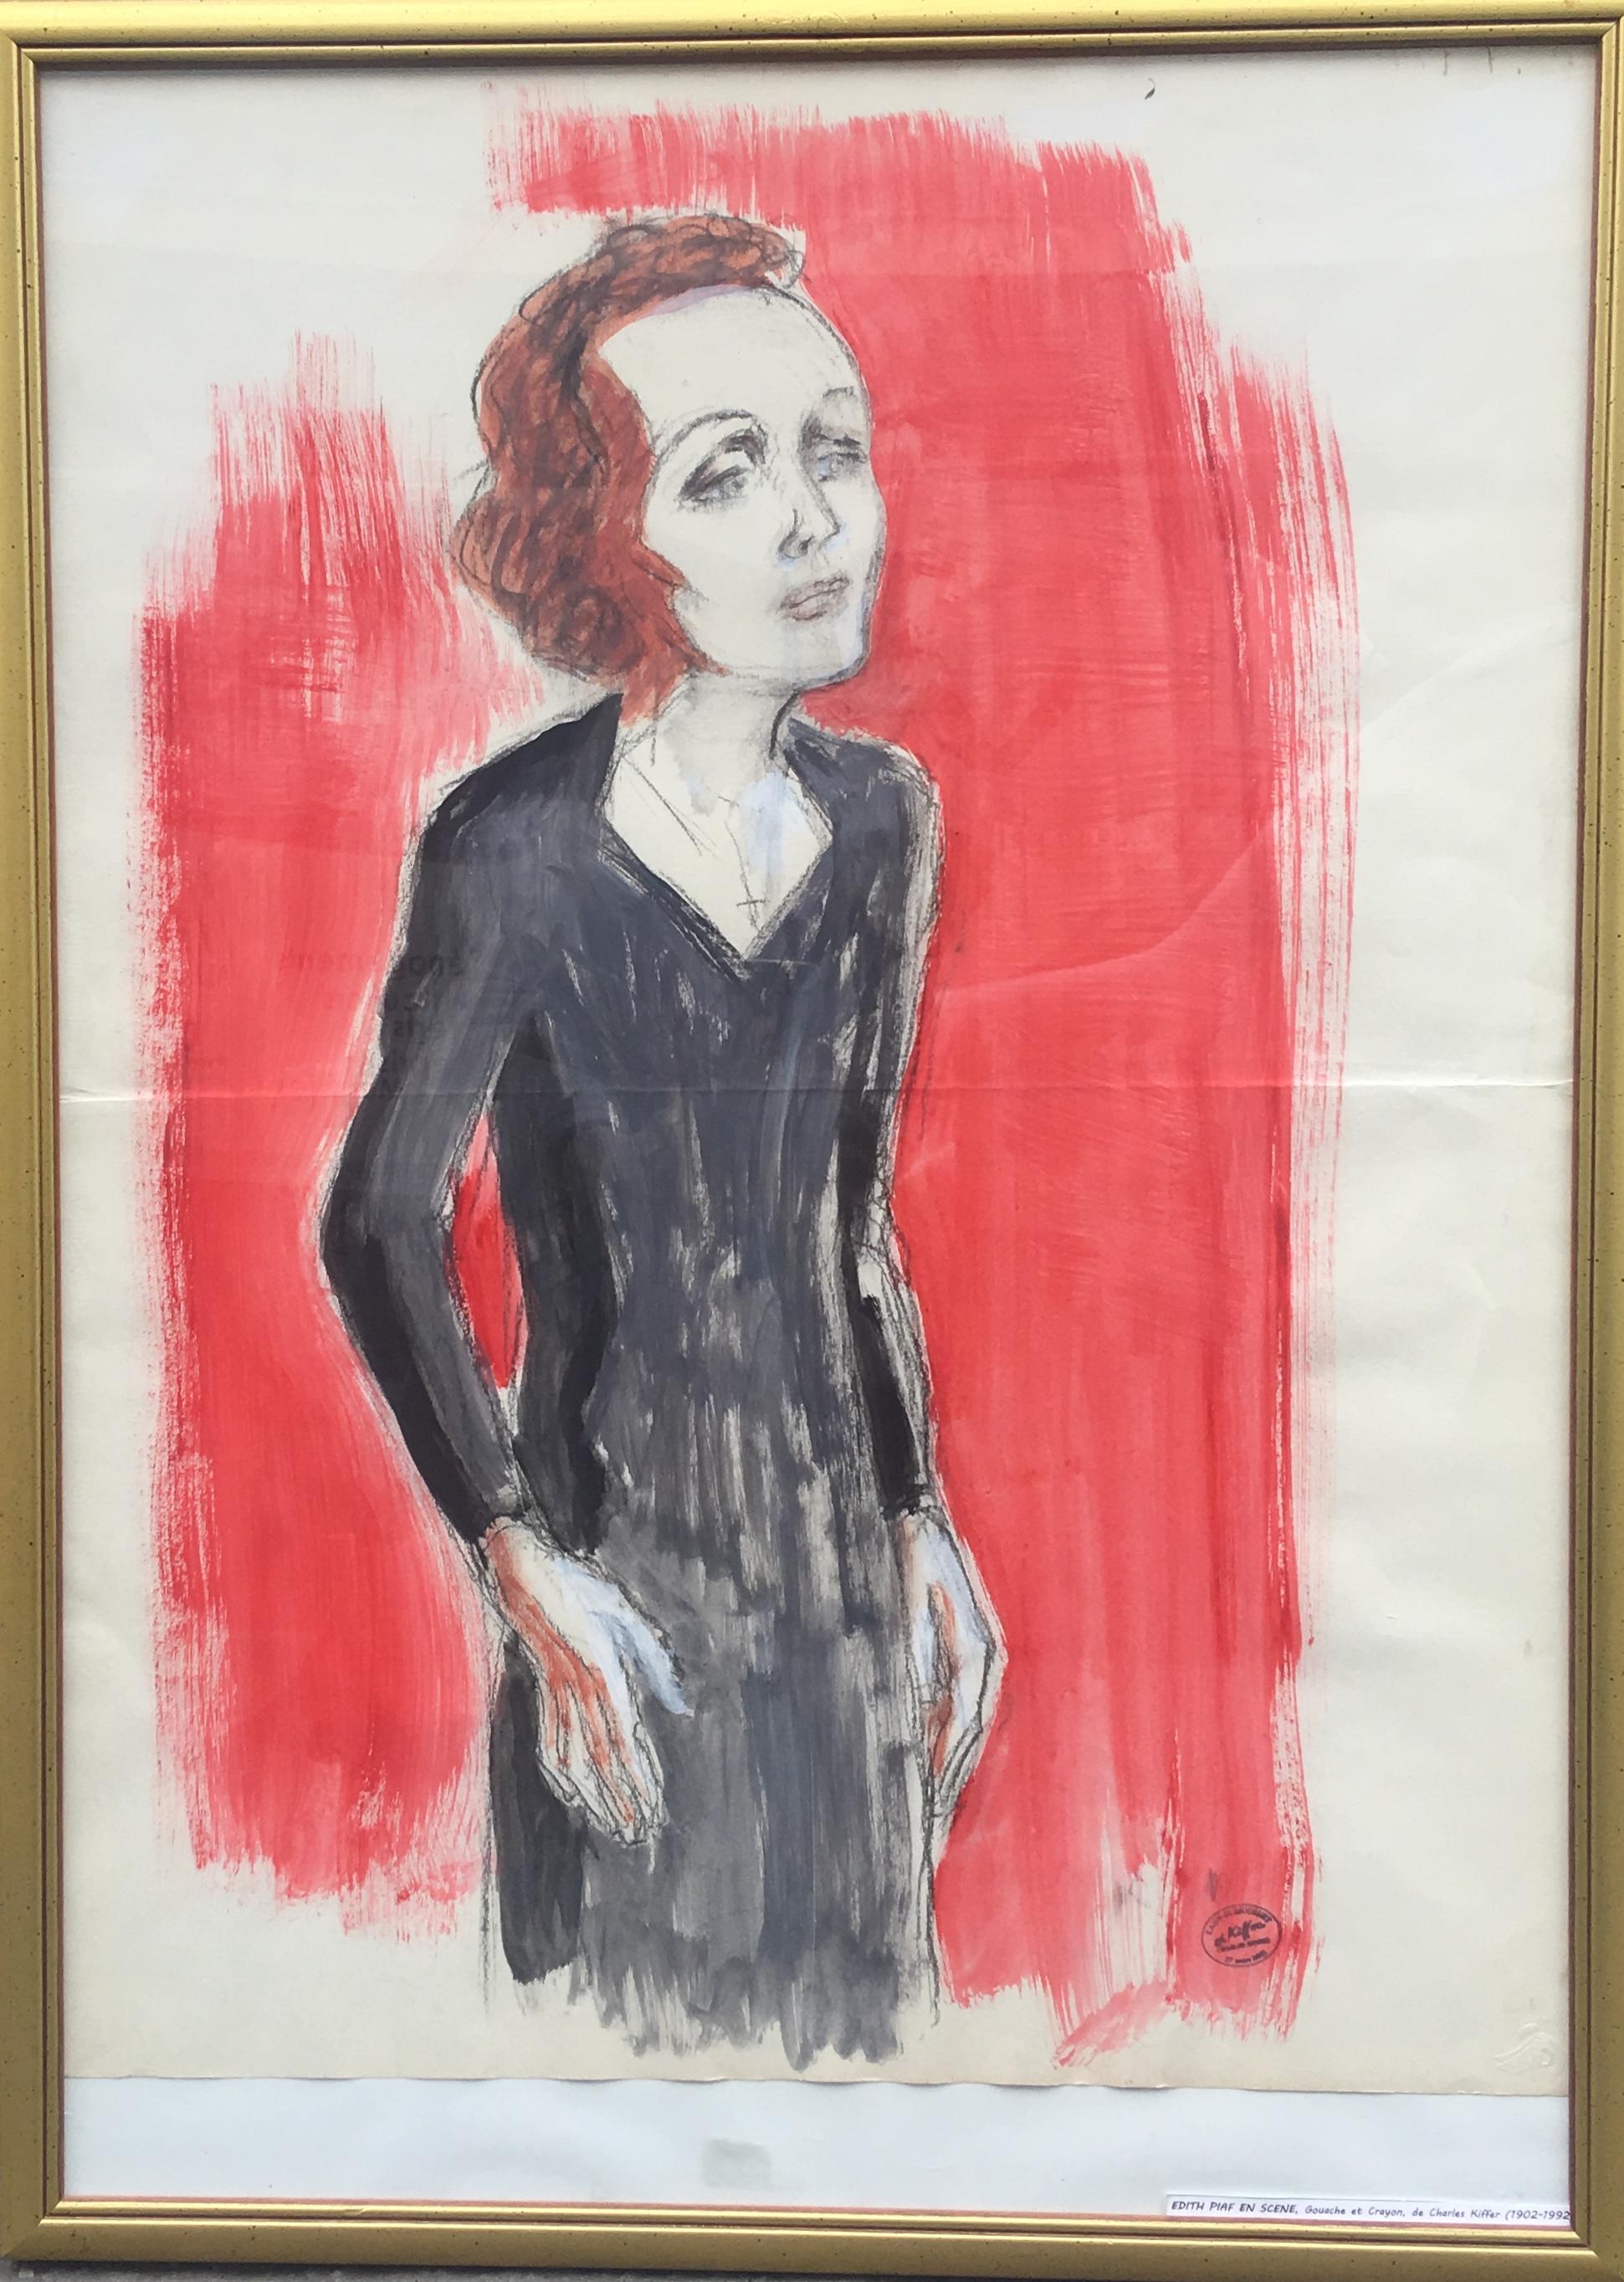 Edith Piaf on stage watercolor and pencil on paper, mongrammed K for Charles Kiffer (1902-1992), Workshop stamp.

Charles Kiffer is well known for his figures, paintings, prints, posters, almost all devoted to theater, music hall and circus.

From